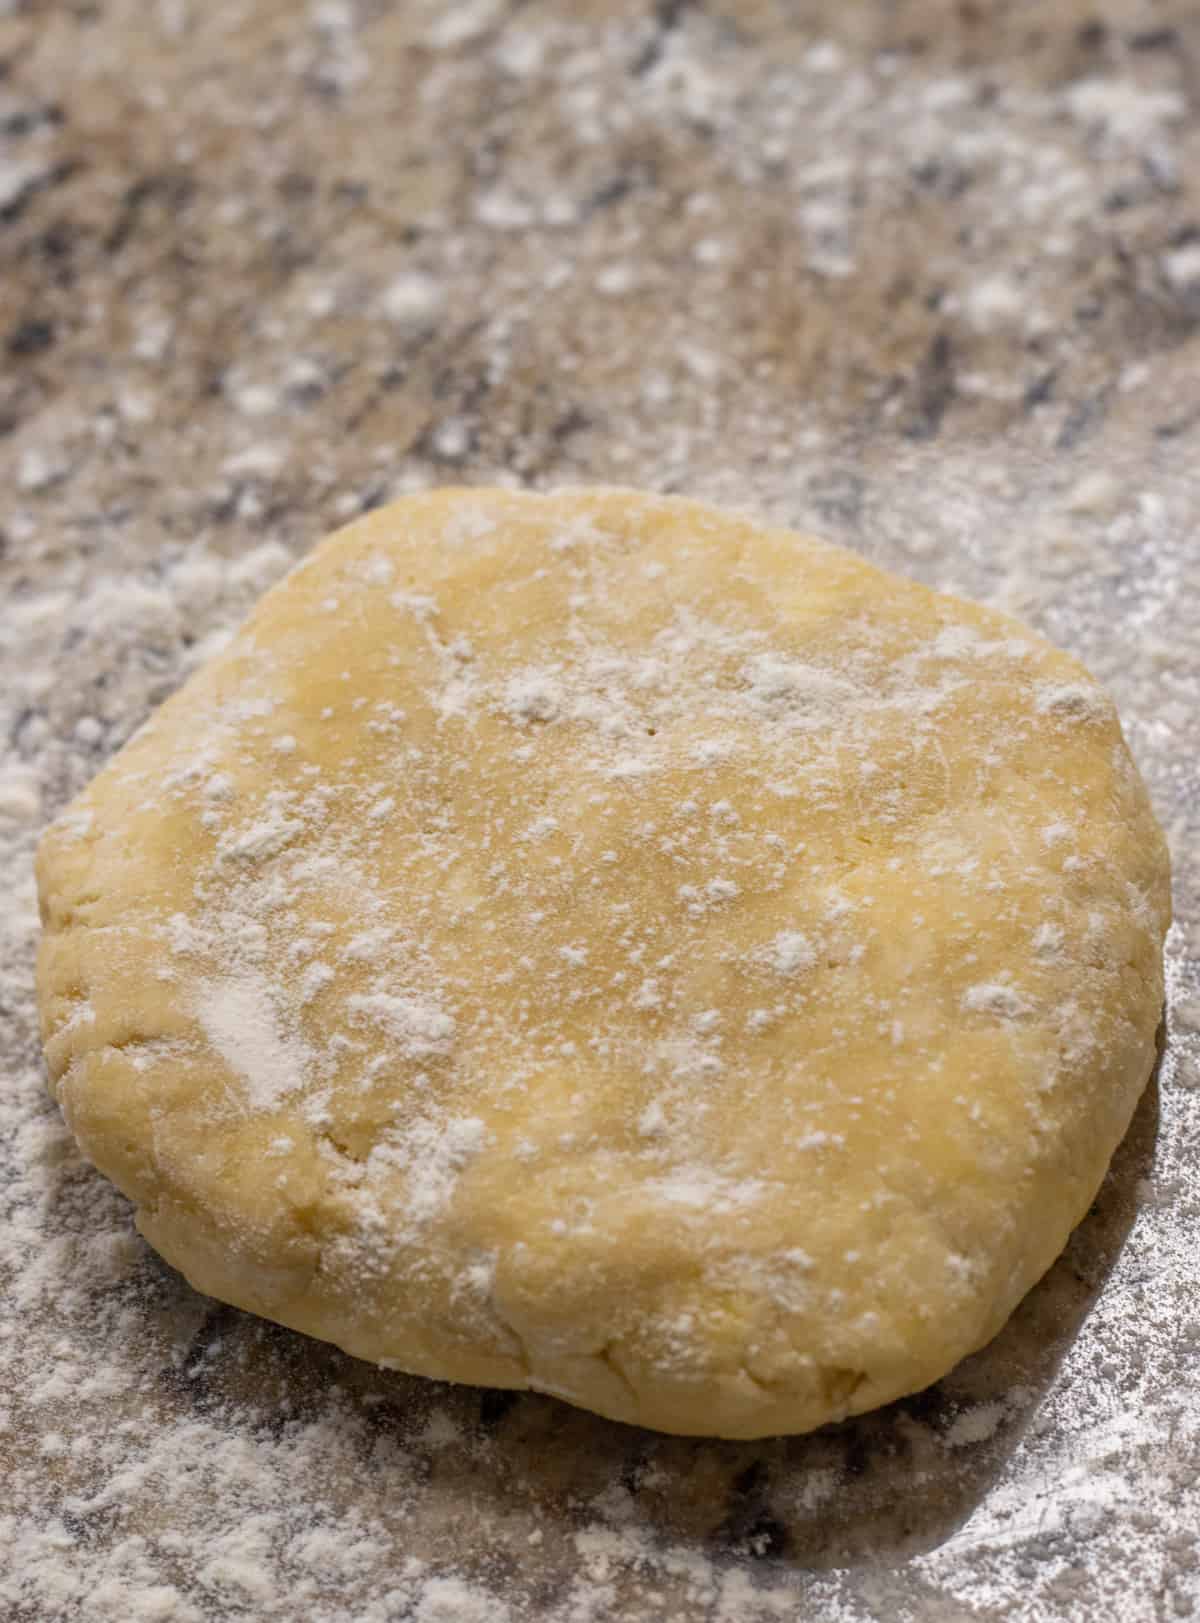 Disk of pie crust coated with flour on a counter.